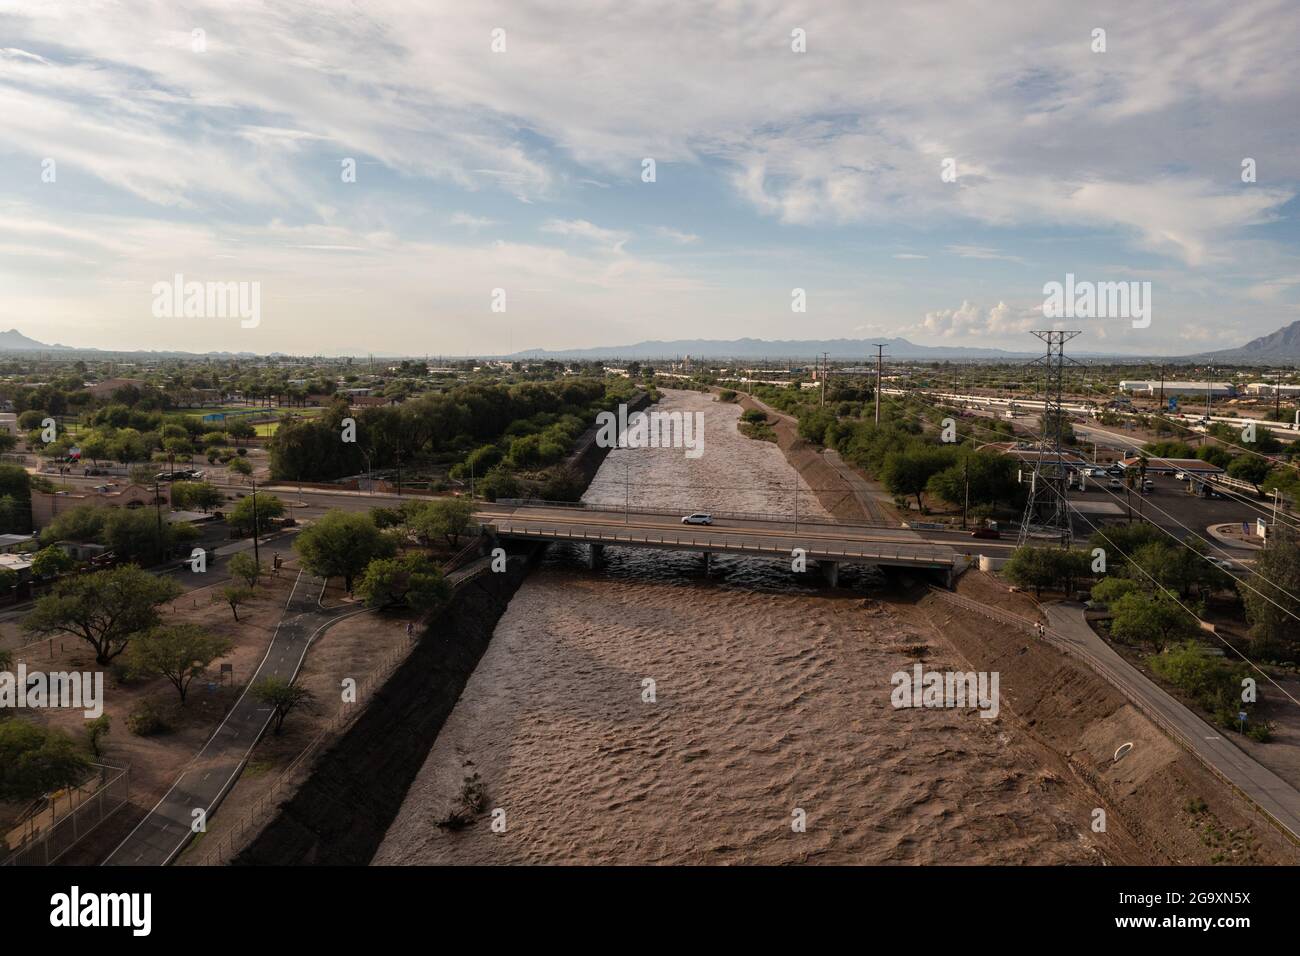 Normally dry river bed in Arizona is full of water Stock Photo